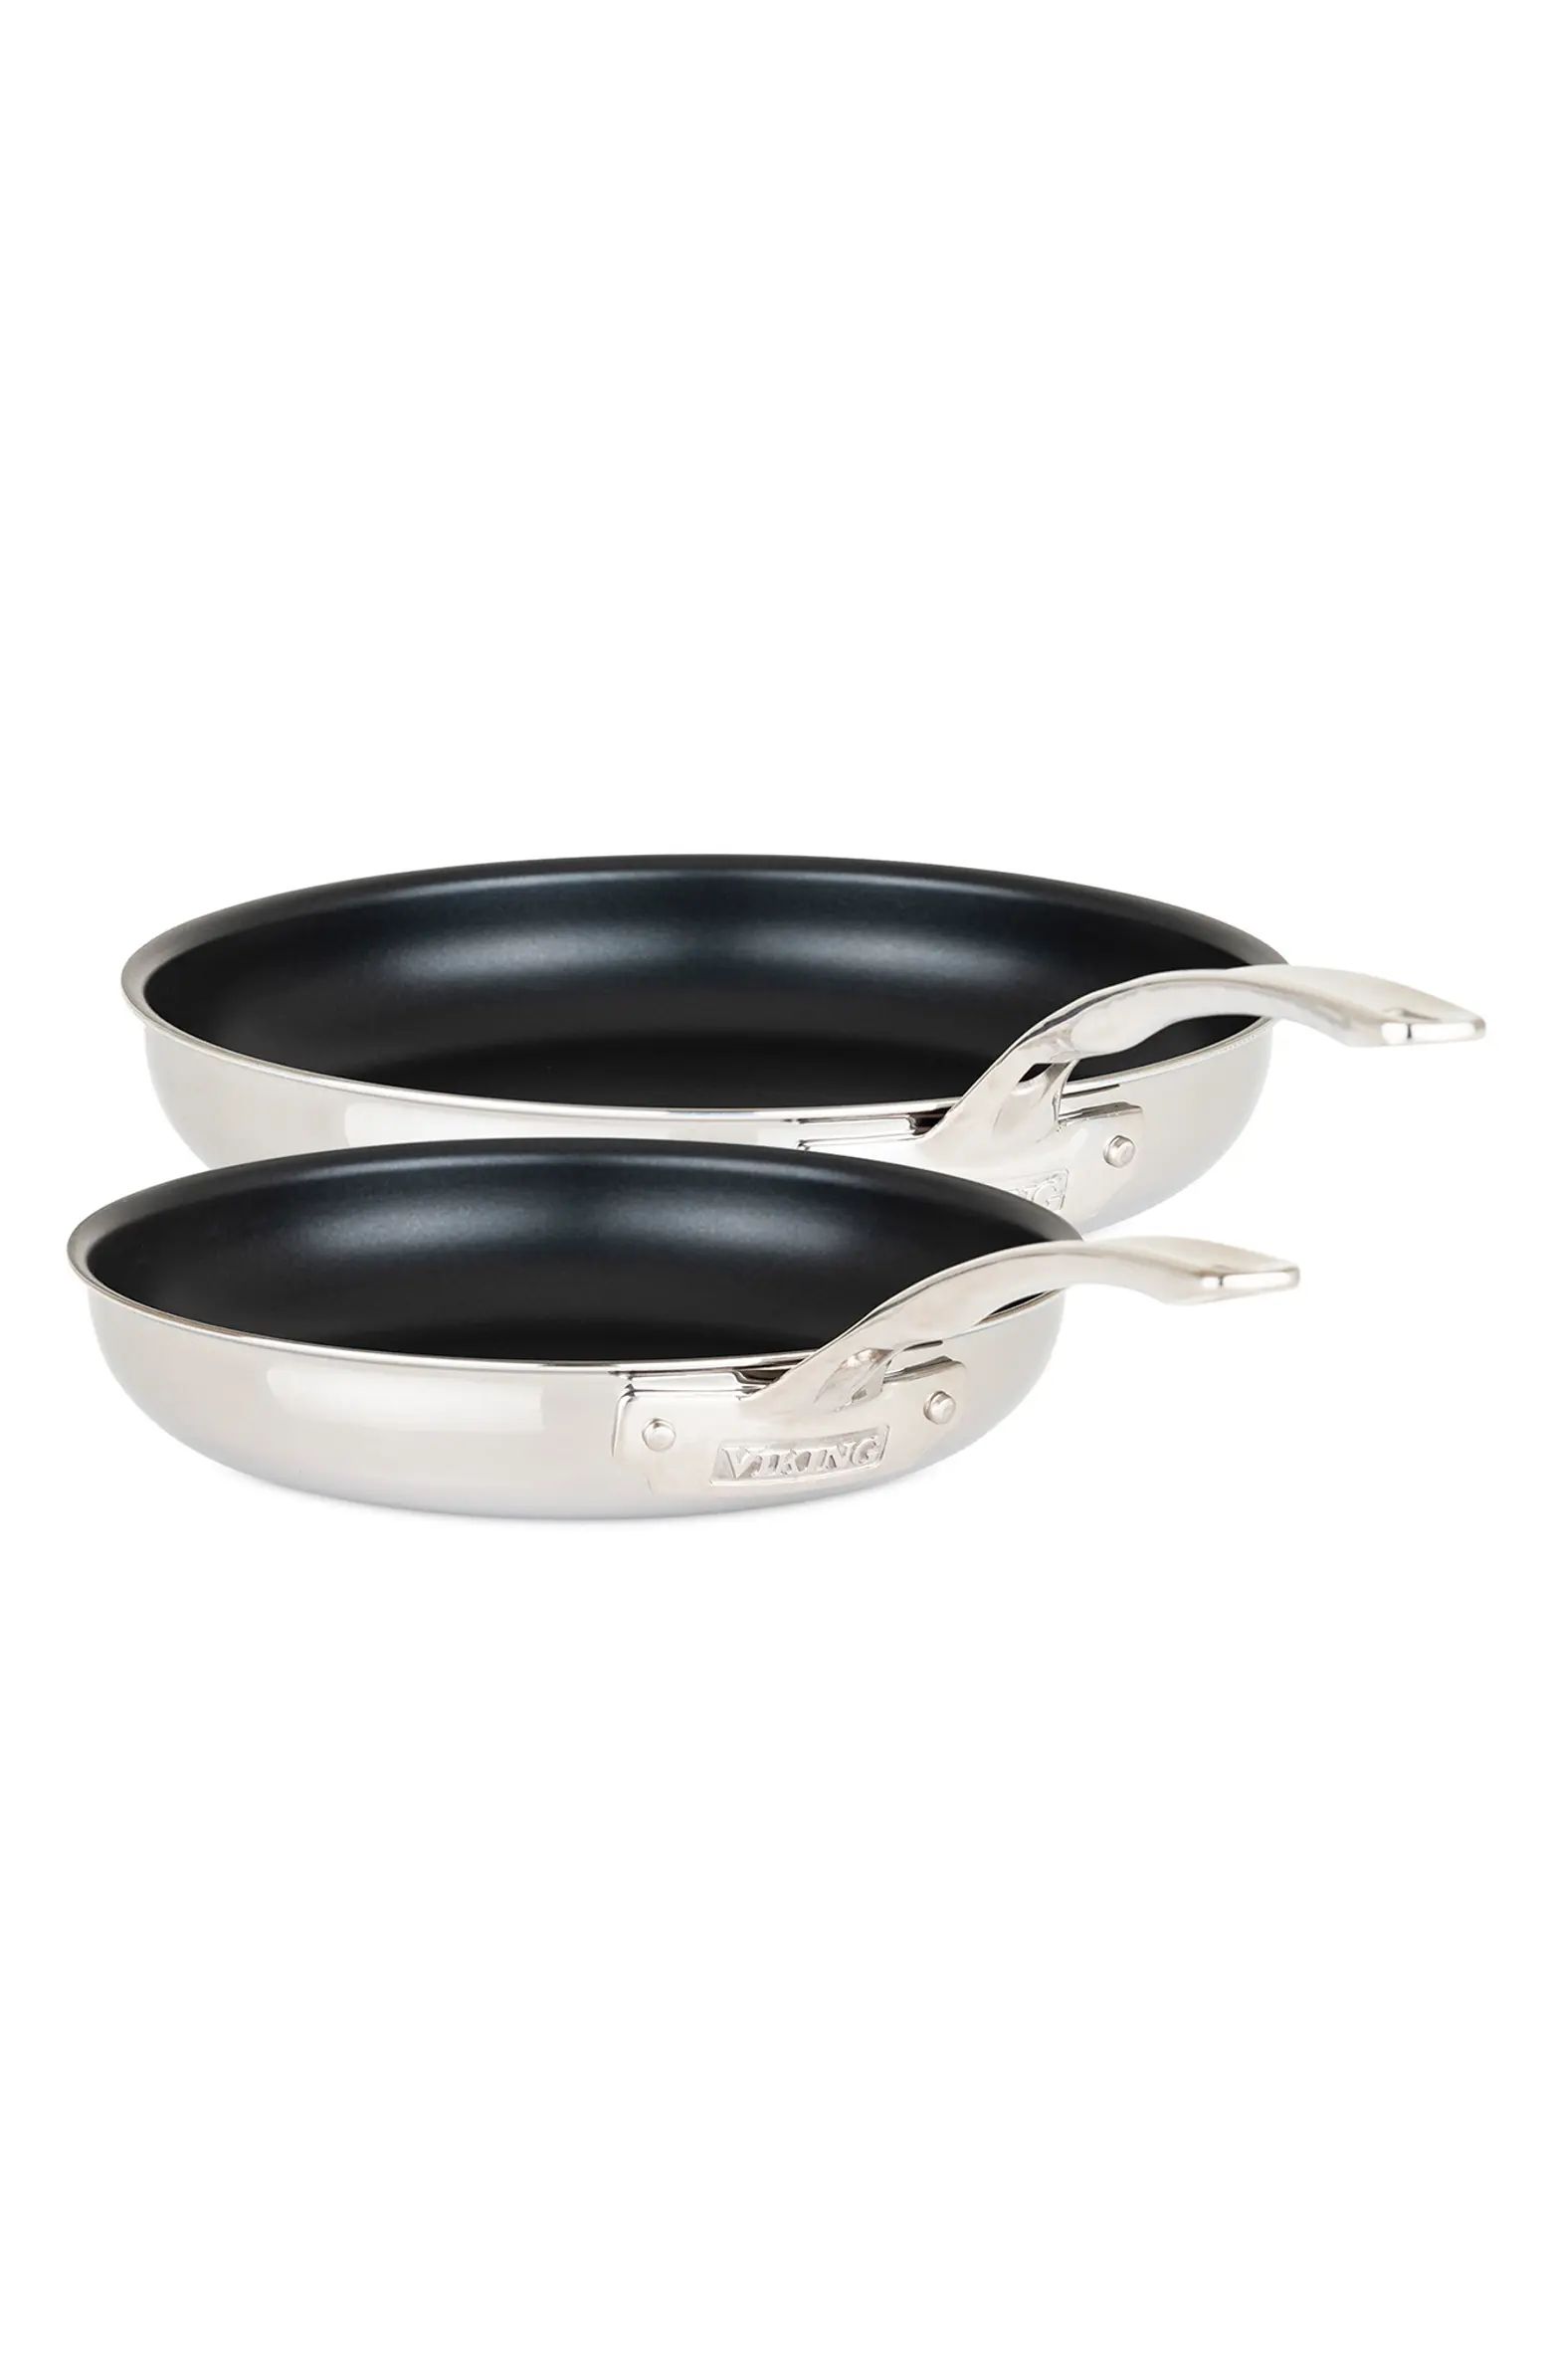 Set of 2 3-Ply Nonstick Stainless Steel Fry Pans | Nordstrom